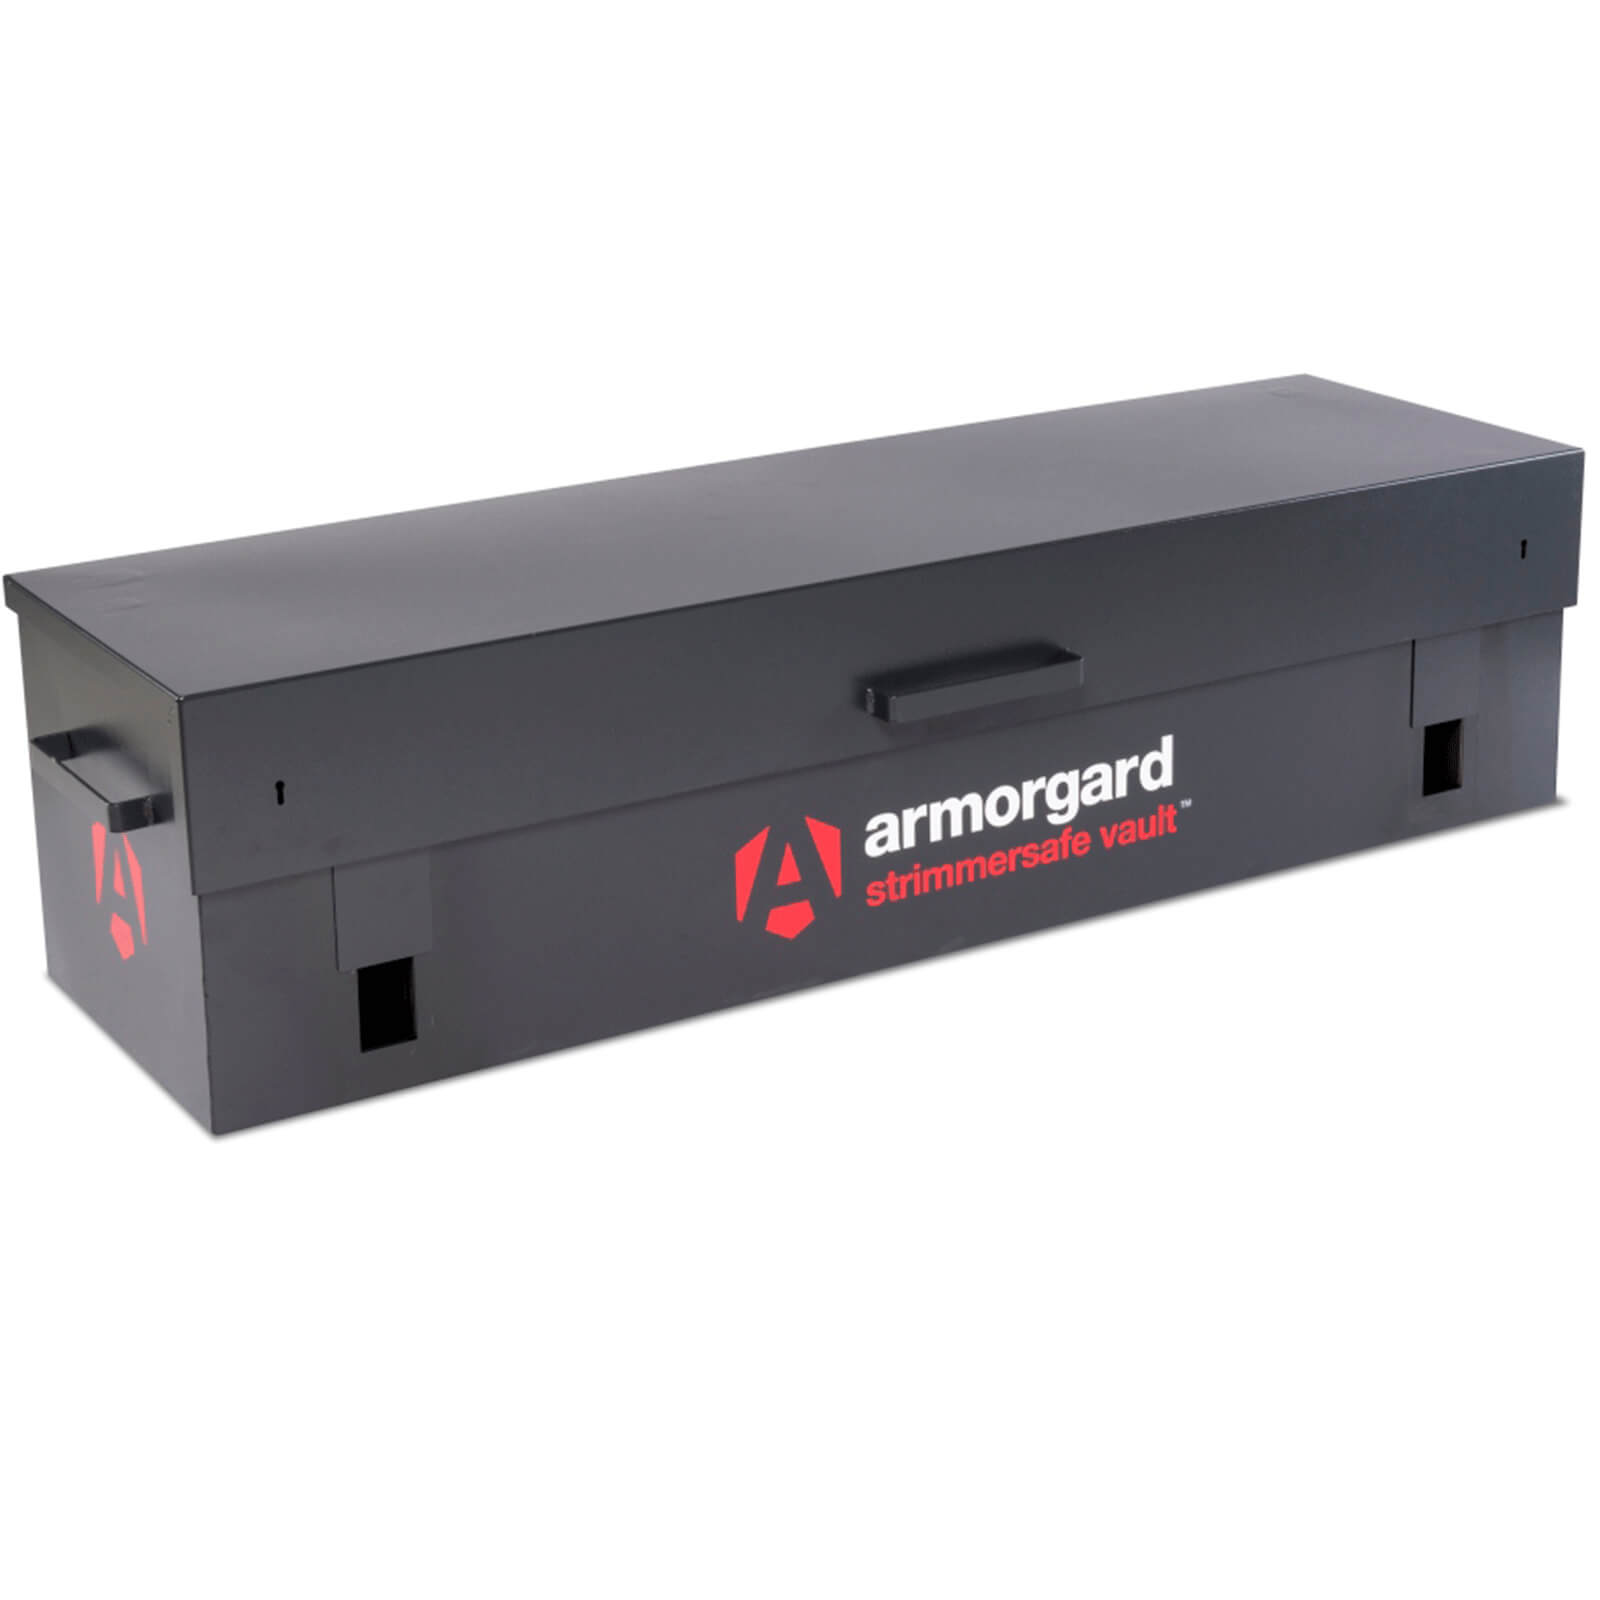 Photo of Armorgard Strimmersafe Secure Vault 1800mm 555mm 445mm